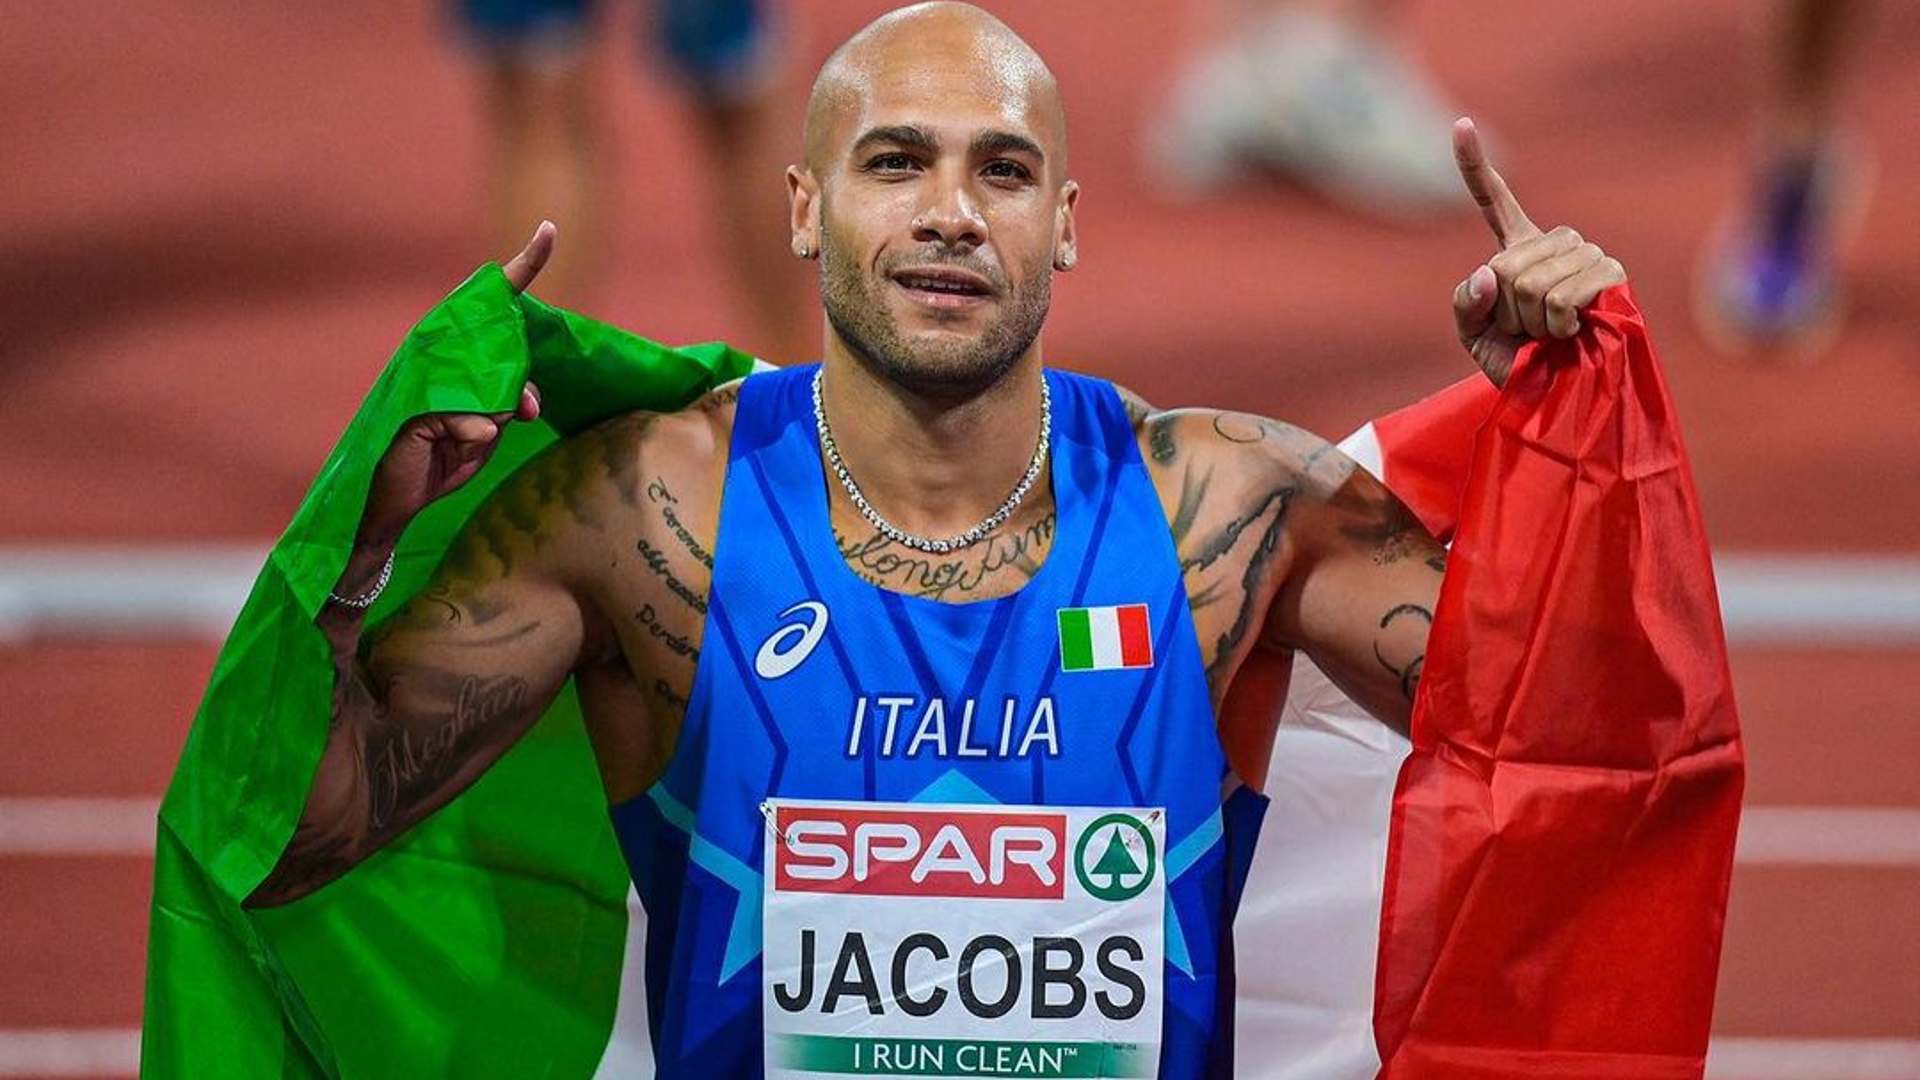 Marcell Jacobs after winning the gold medal in the European Championships 2022 (Image Credits - Instagram/@crazylongjumper)